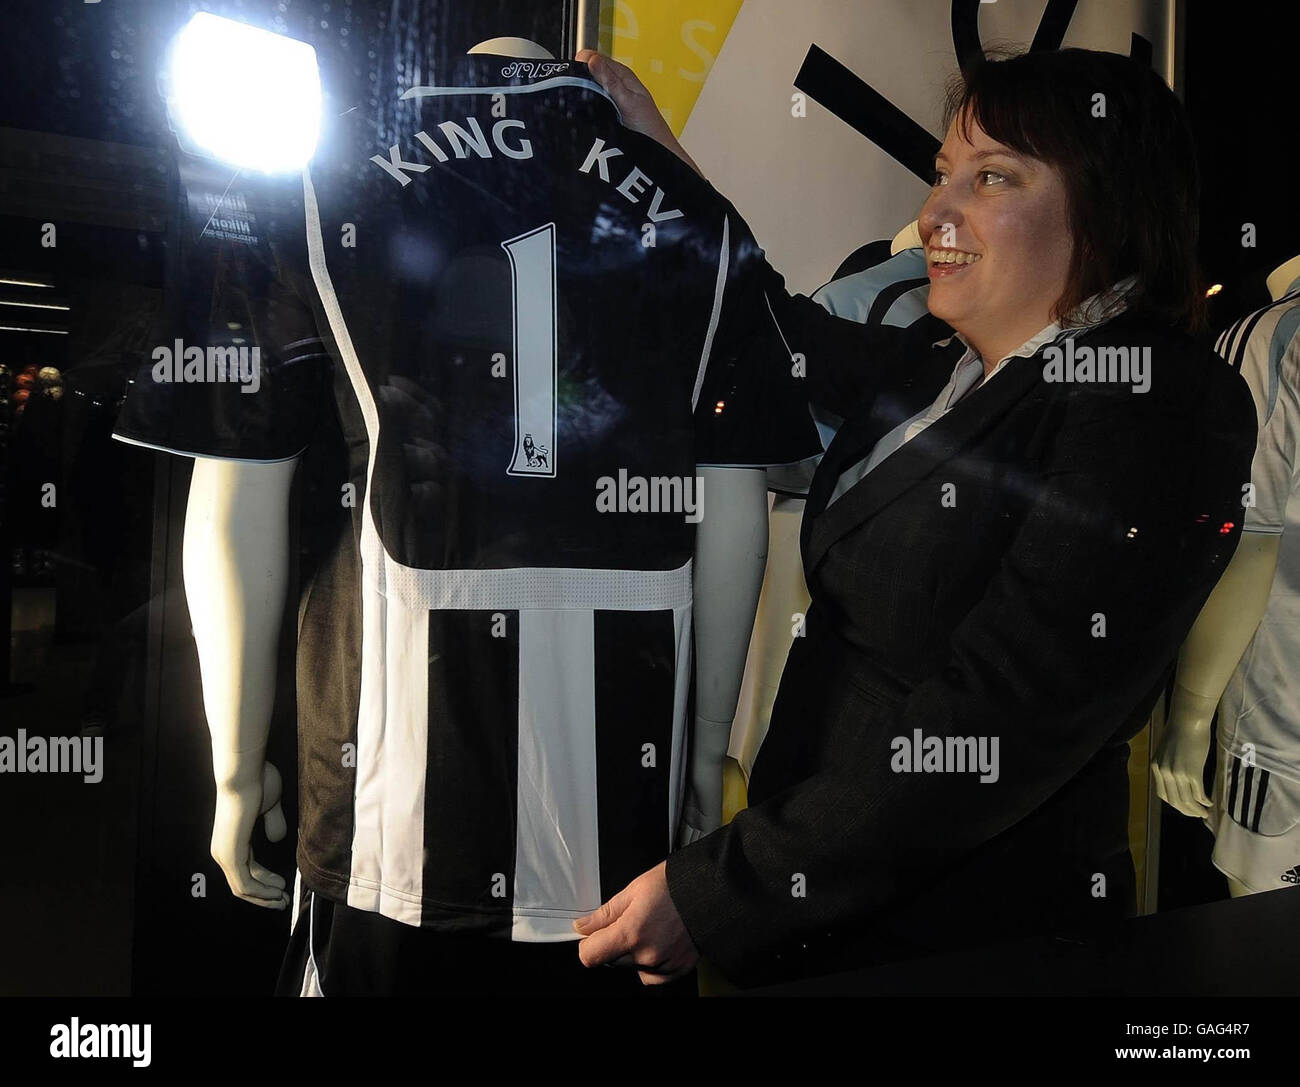 Newcastle united football club shop hi-res stock and images - Alamy